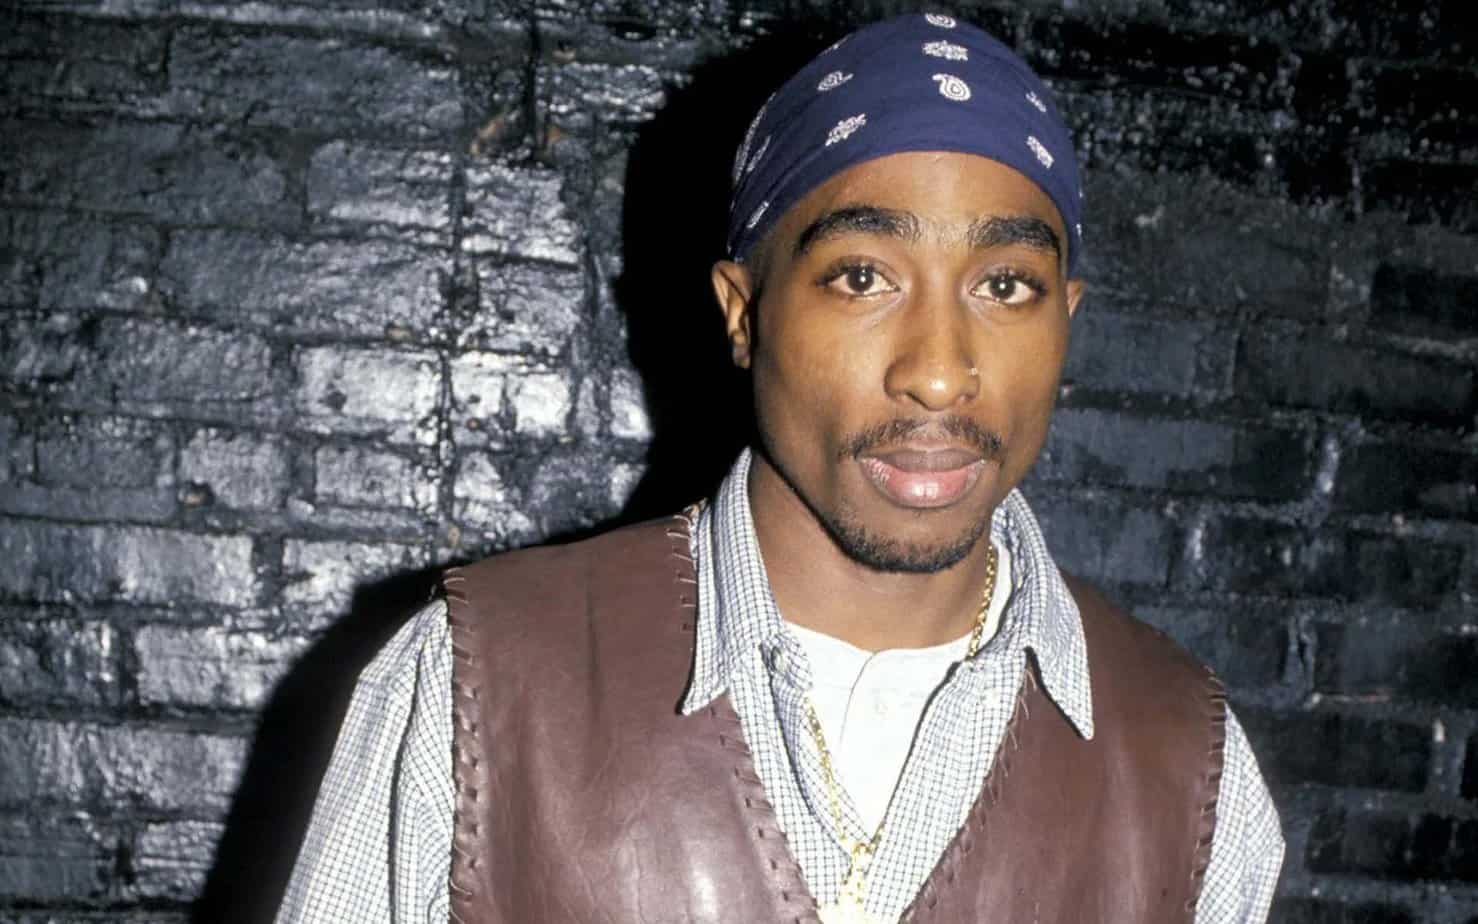 Man Named Tupac Shakur Files for Unemployment